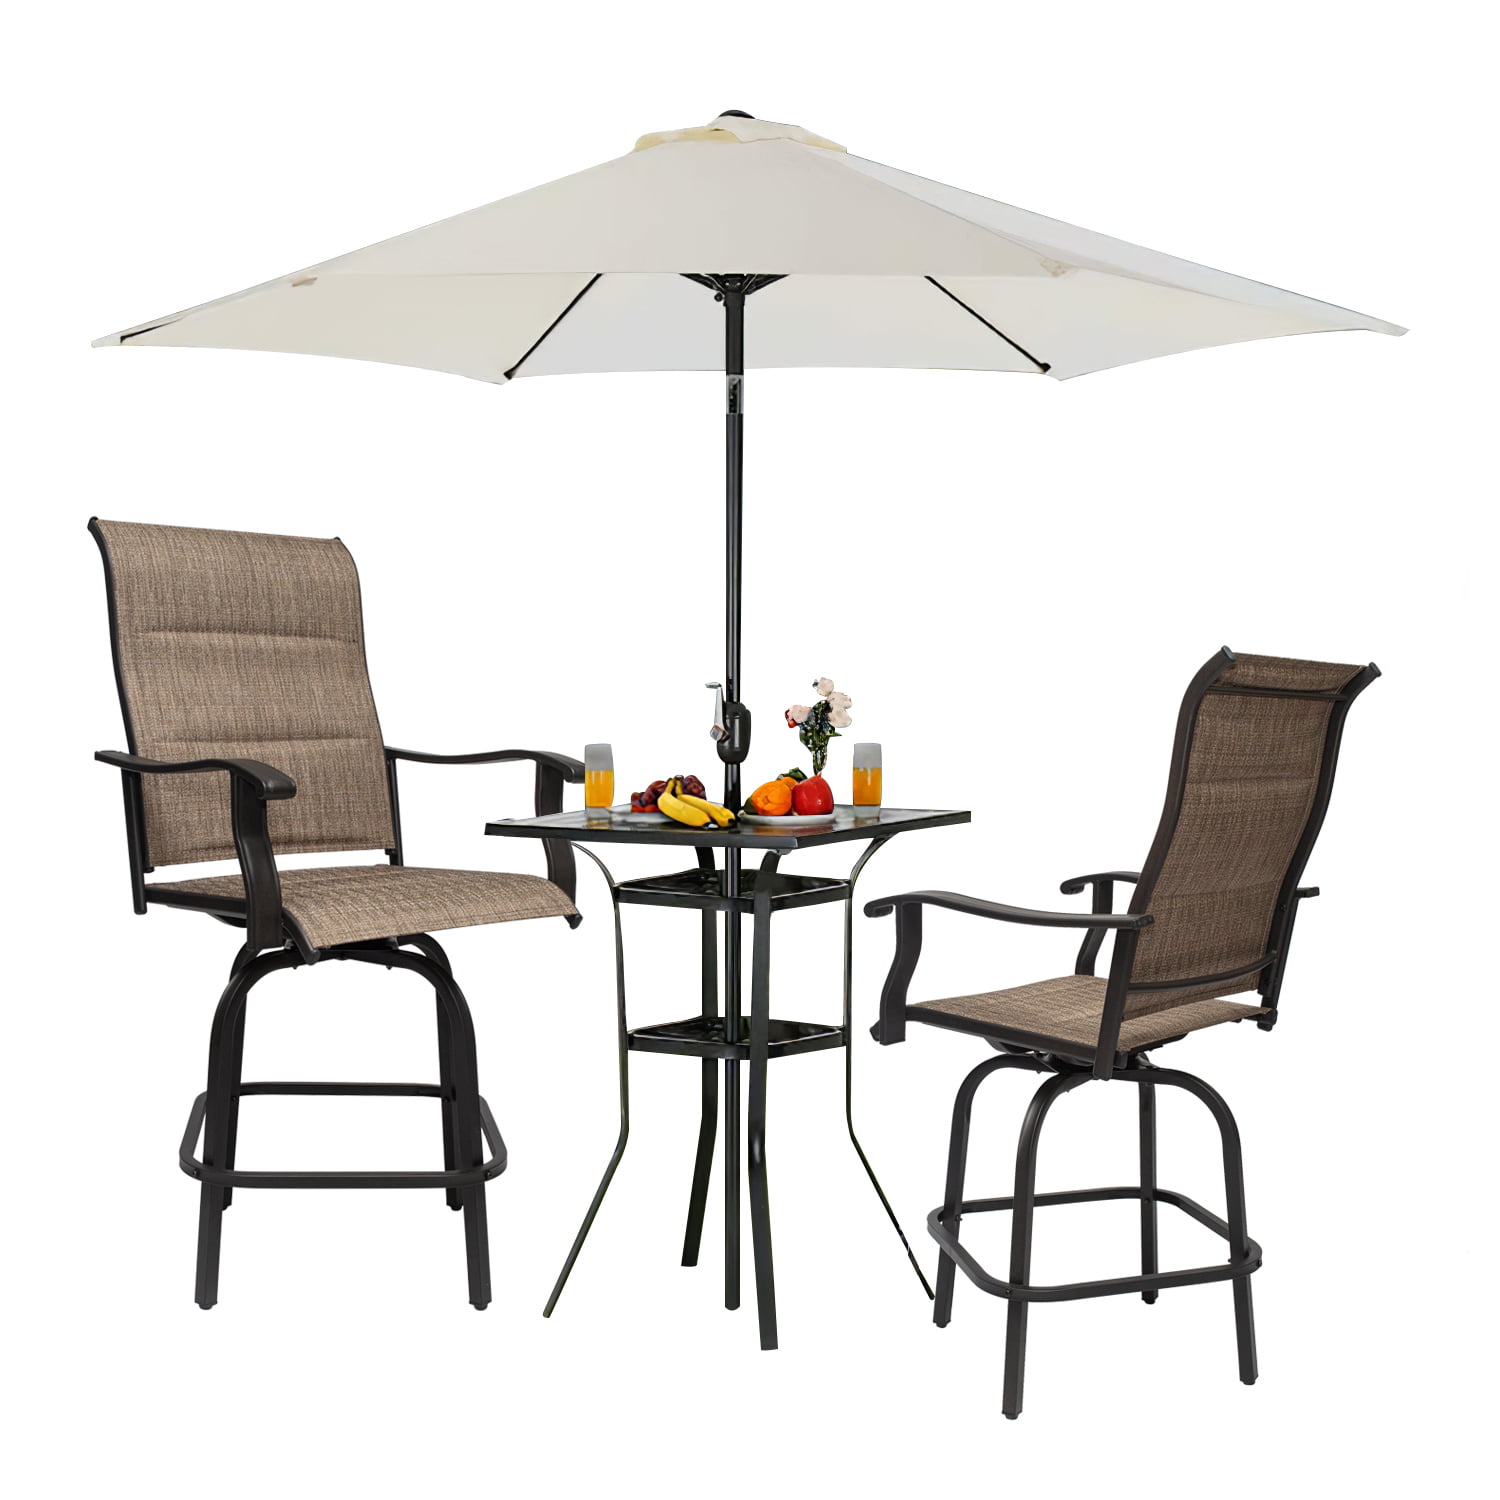 Outdoor Bar Height Patio Furniture, Outdoor Pub Table Set With Umbrella Hole